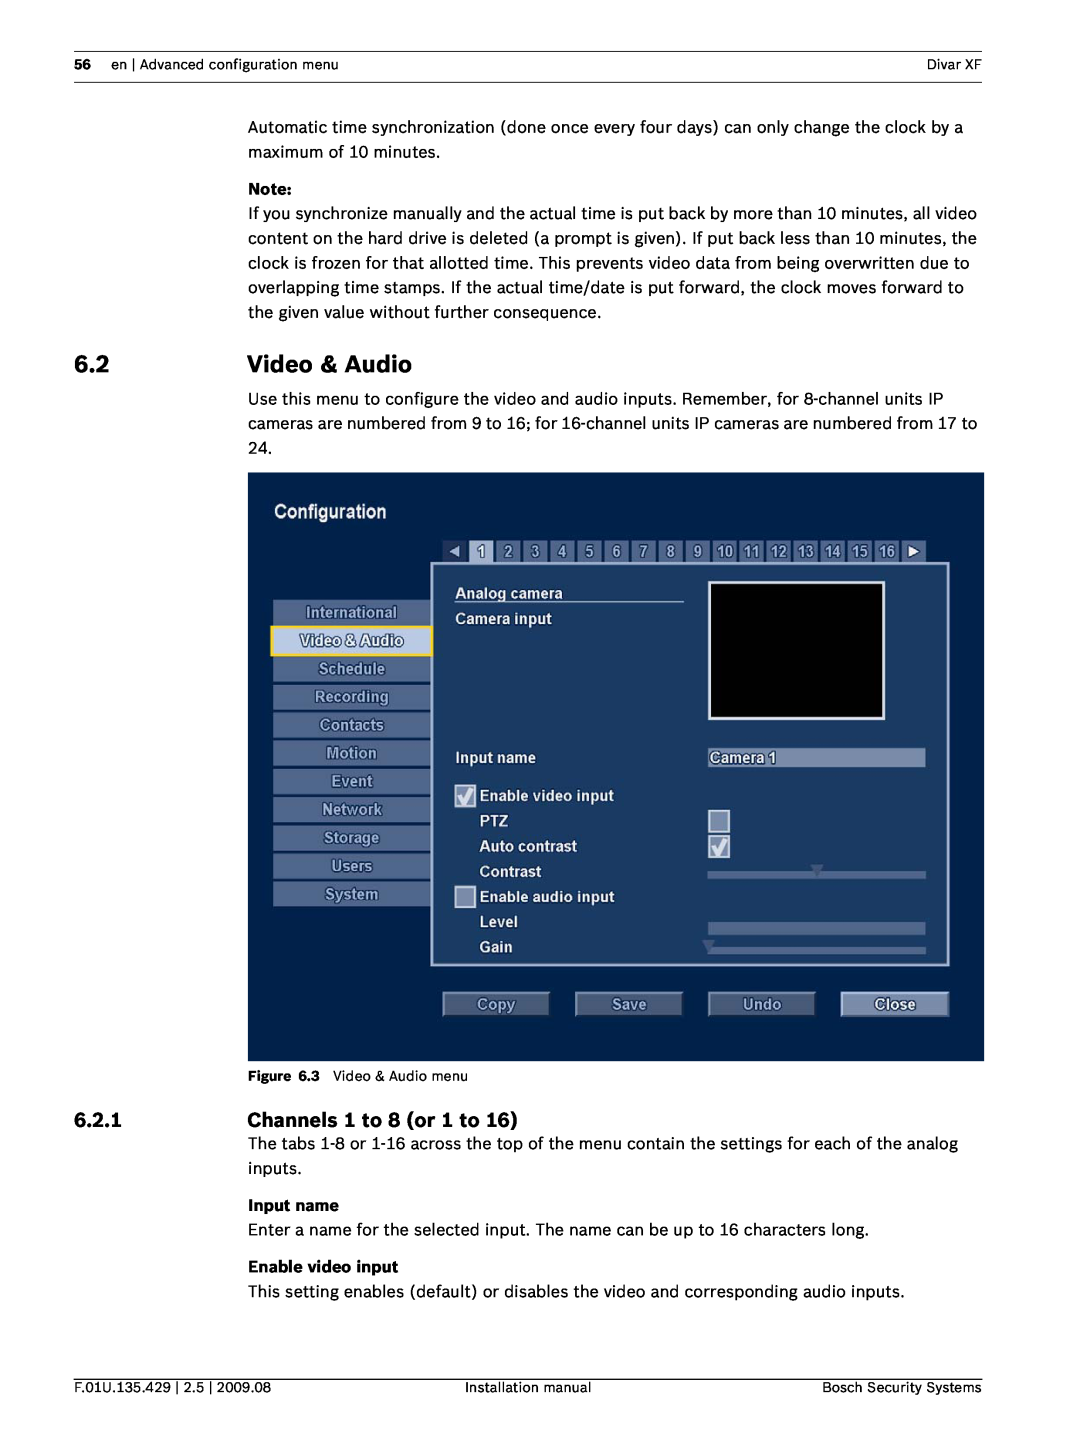 Bosch Appliances XF installation manual Video & Audio, 6.2.1, Channels 1 to 8 or 1 to, Input name, Enable video input 